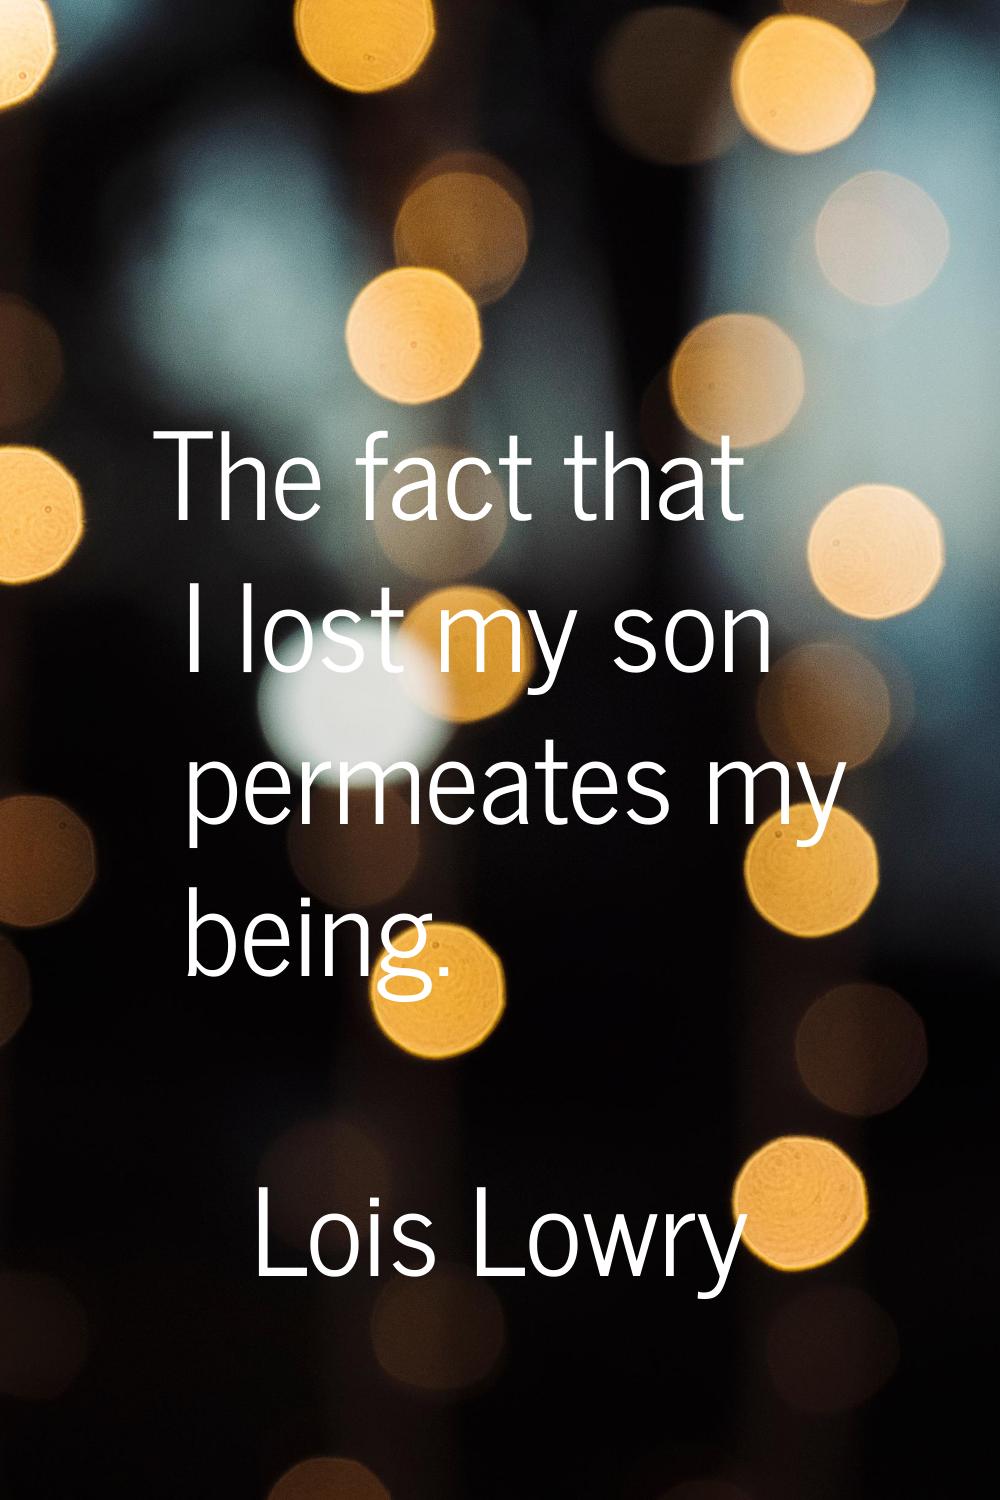 The fact that I lost my son permeates my being.